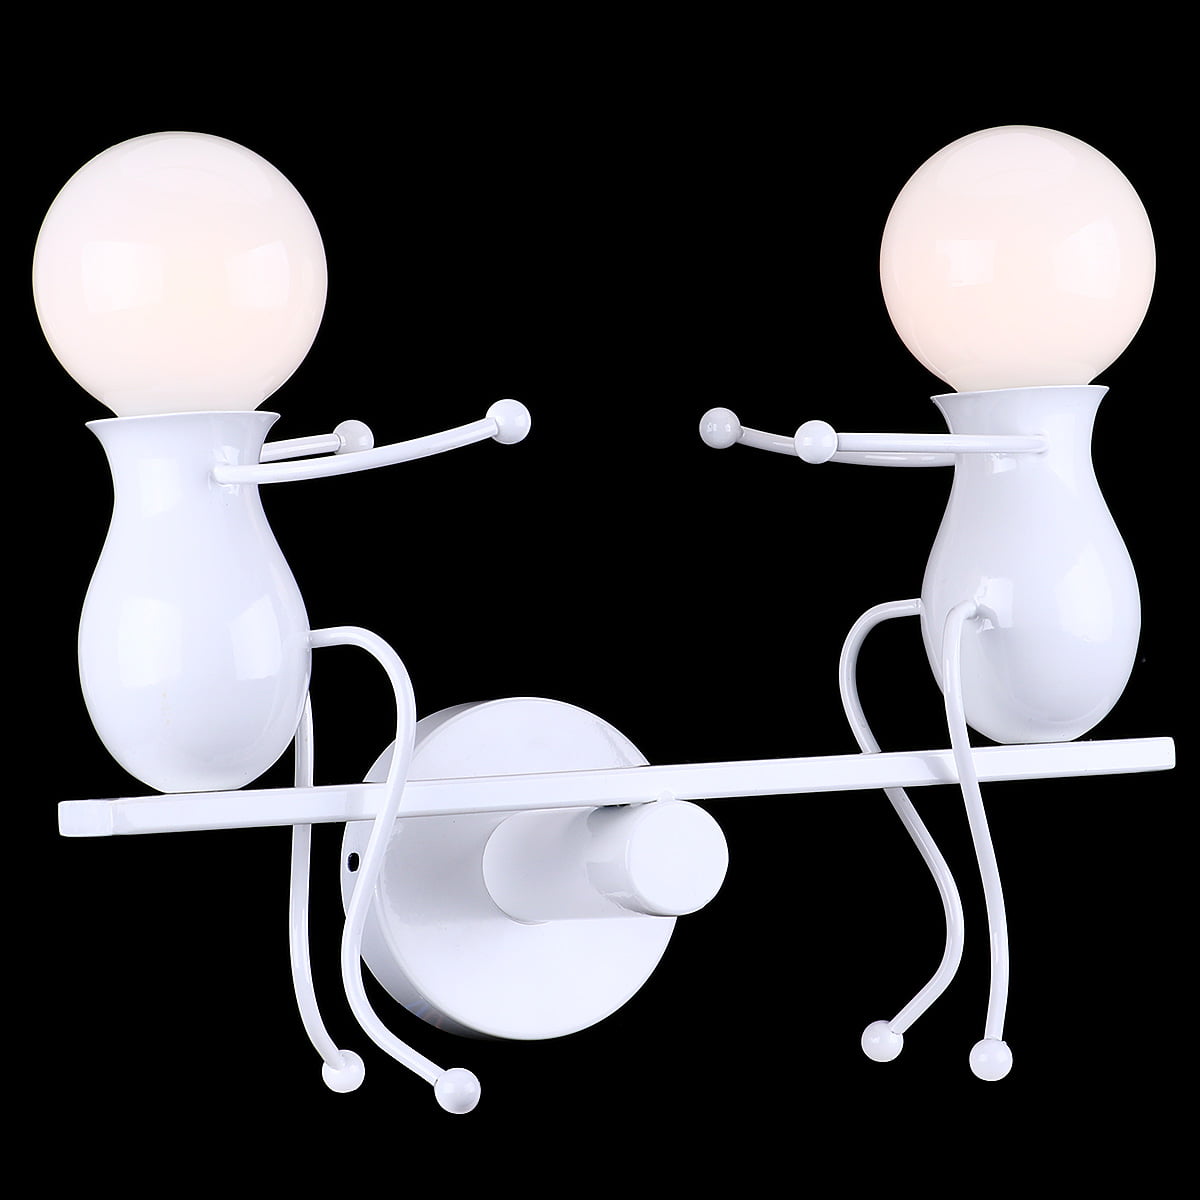 SOUTHPO LED Wall Light Fixtures Creative Double Little People Mini Wall Sconces Lighting Modern Decor Adjustable Swing Metal Bedside Lamp Children Cartoon Doll Gift Wall Lamps Bedroom 2×E26 White